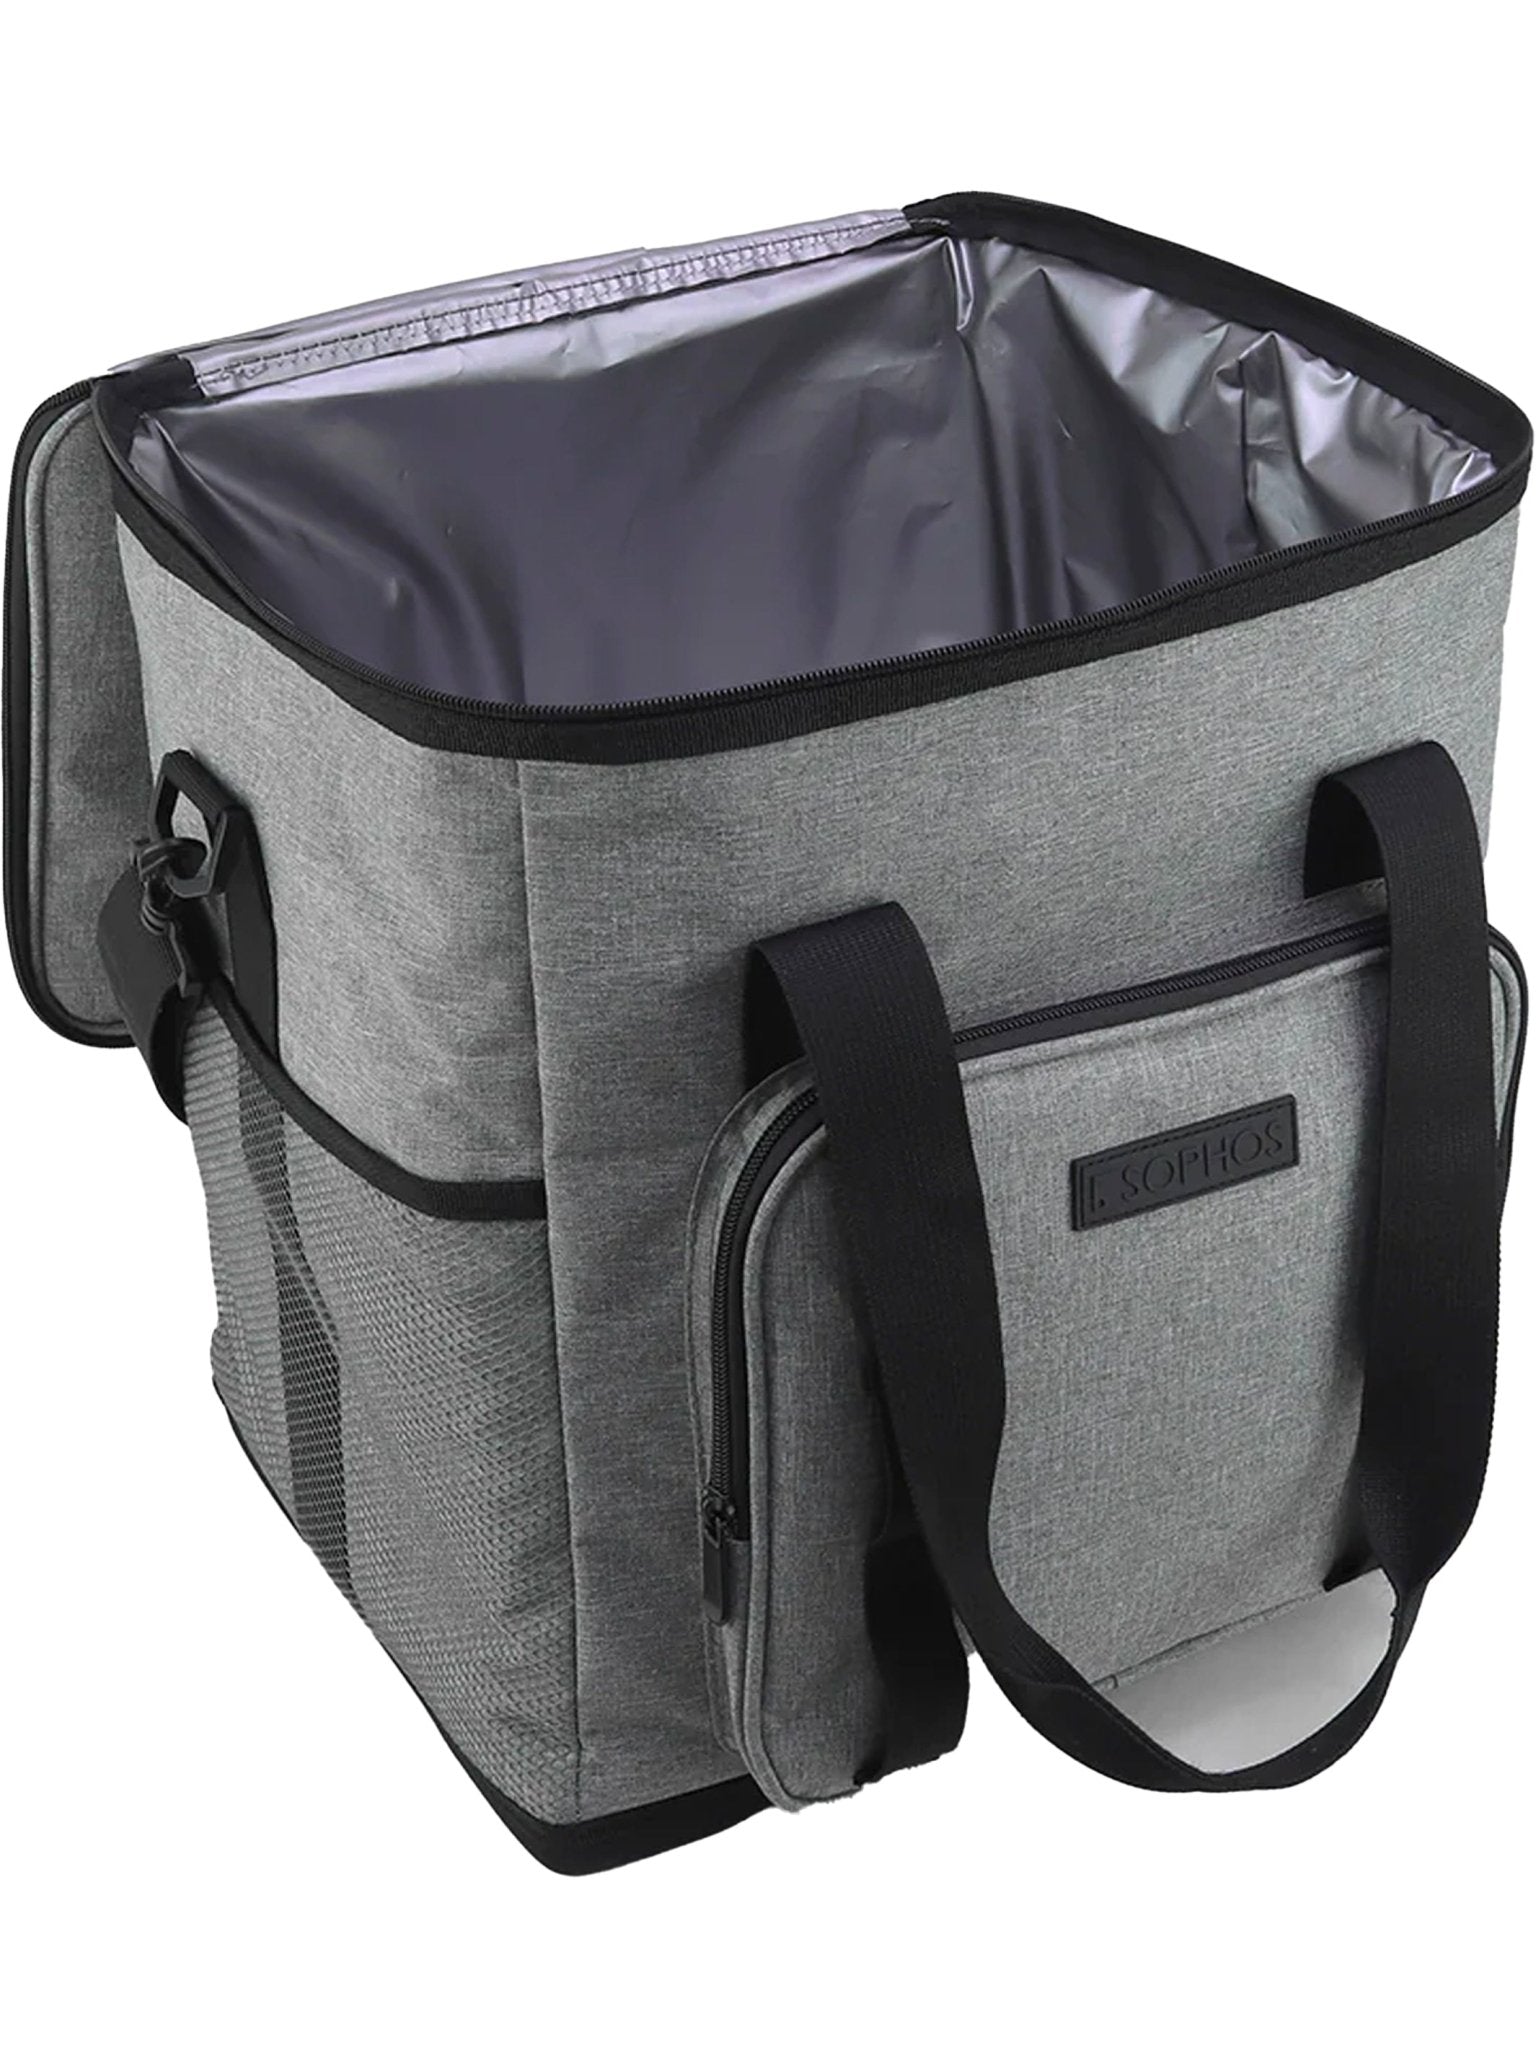 4elementsclothingSophosSophos - Premium Cool bag / picnic bag with shoulder strap and compartments by SophosLunch Boxes795044